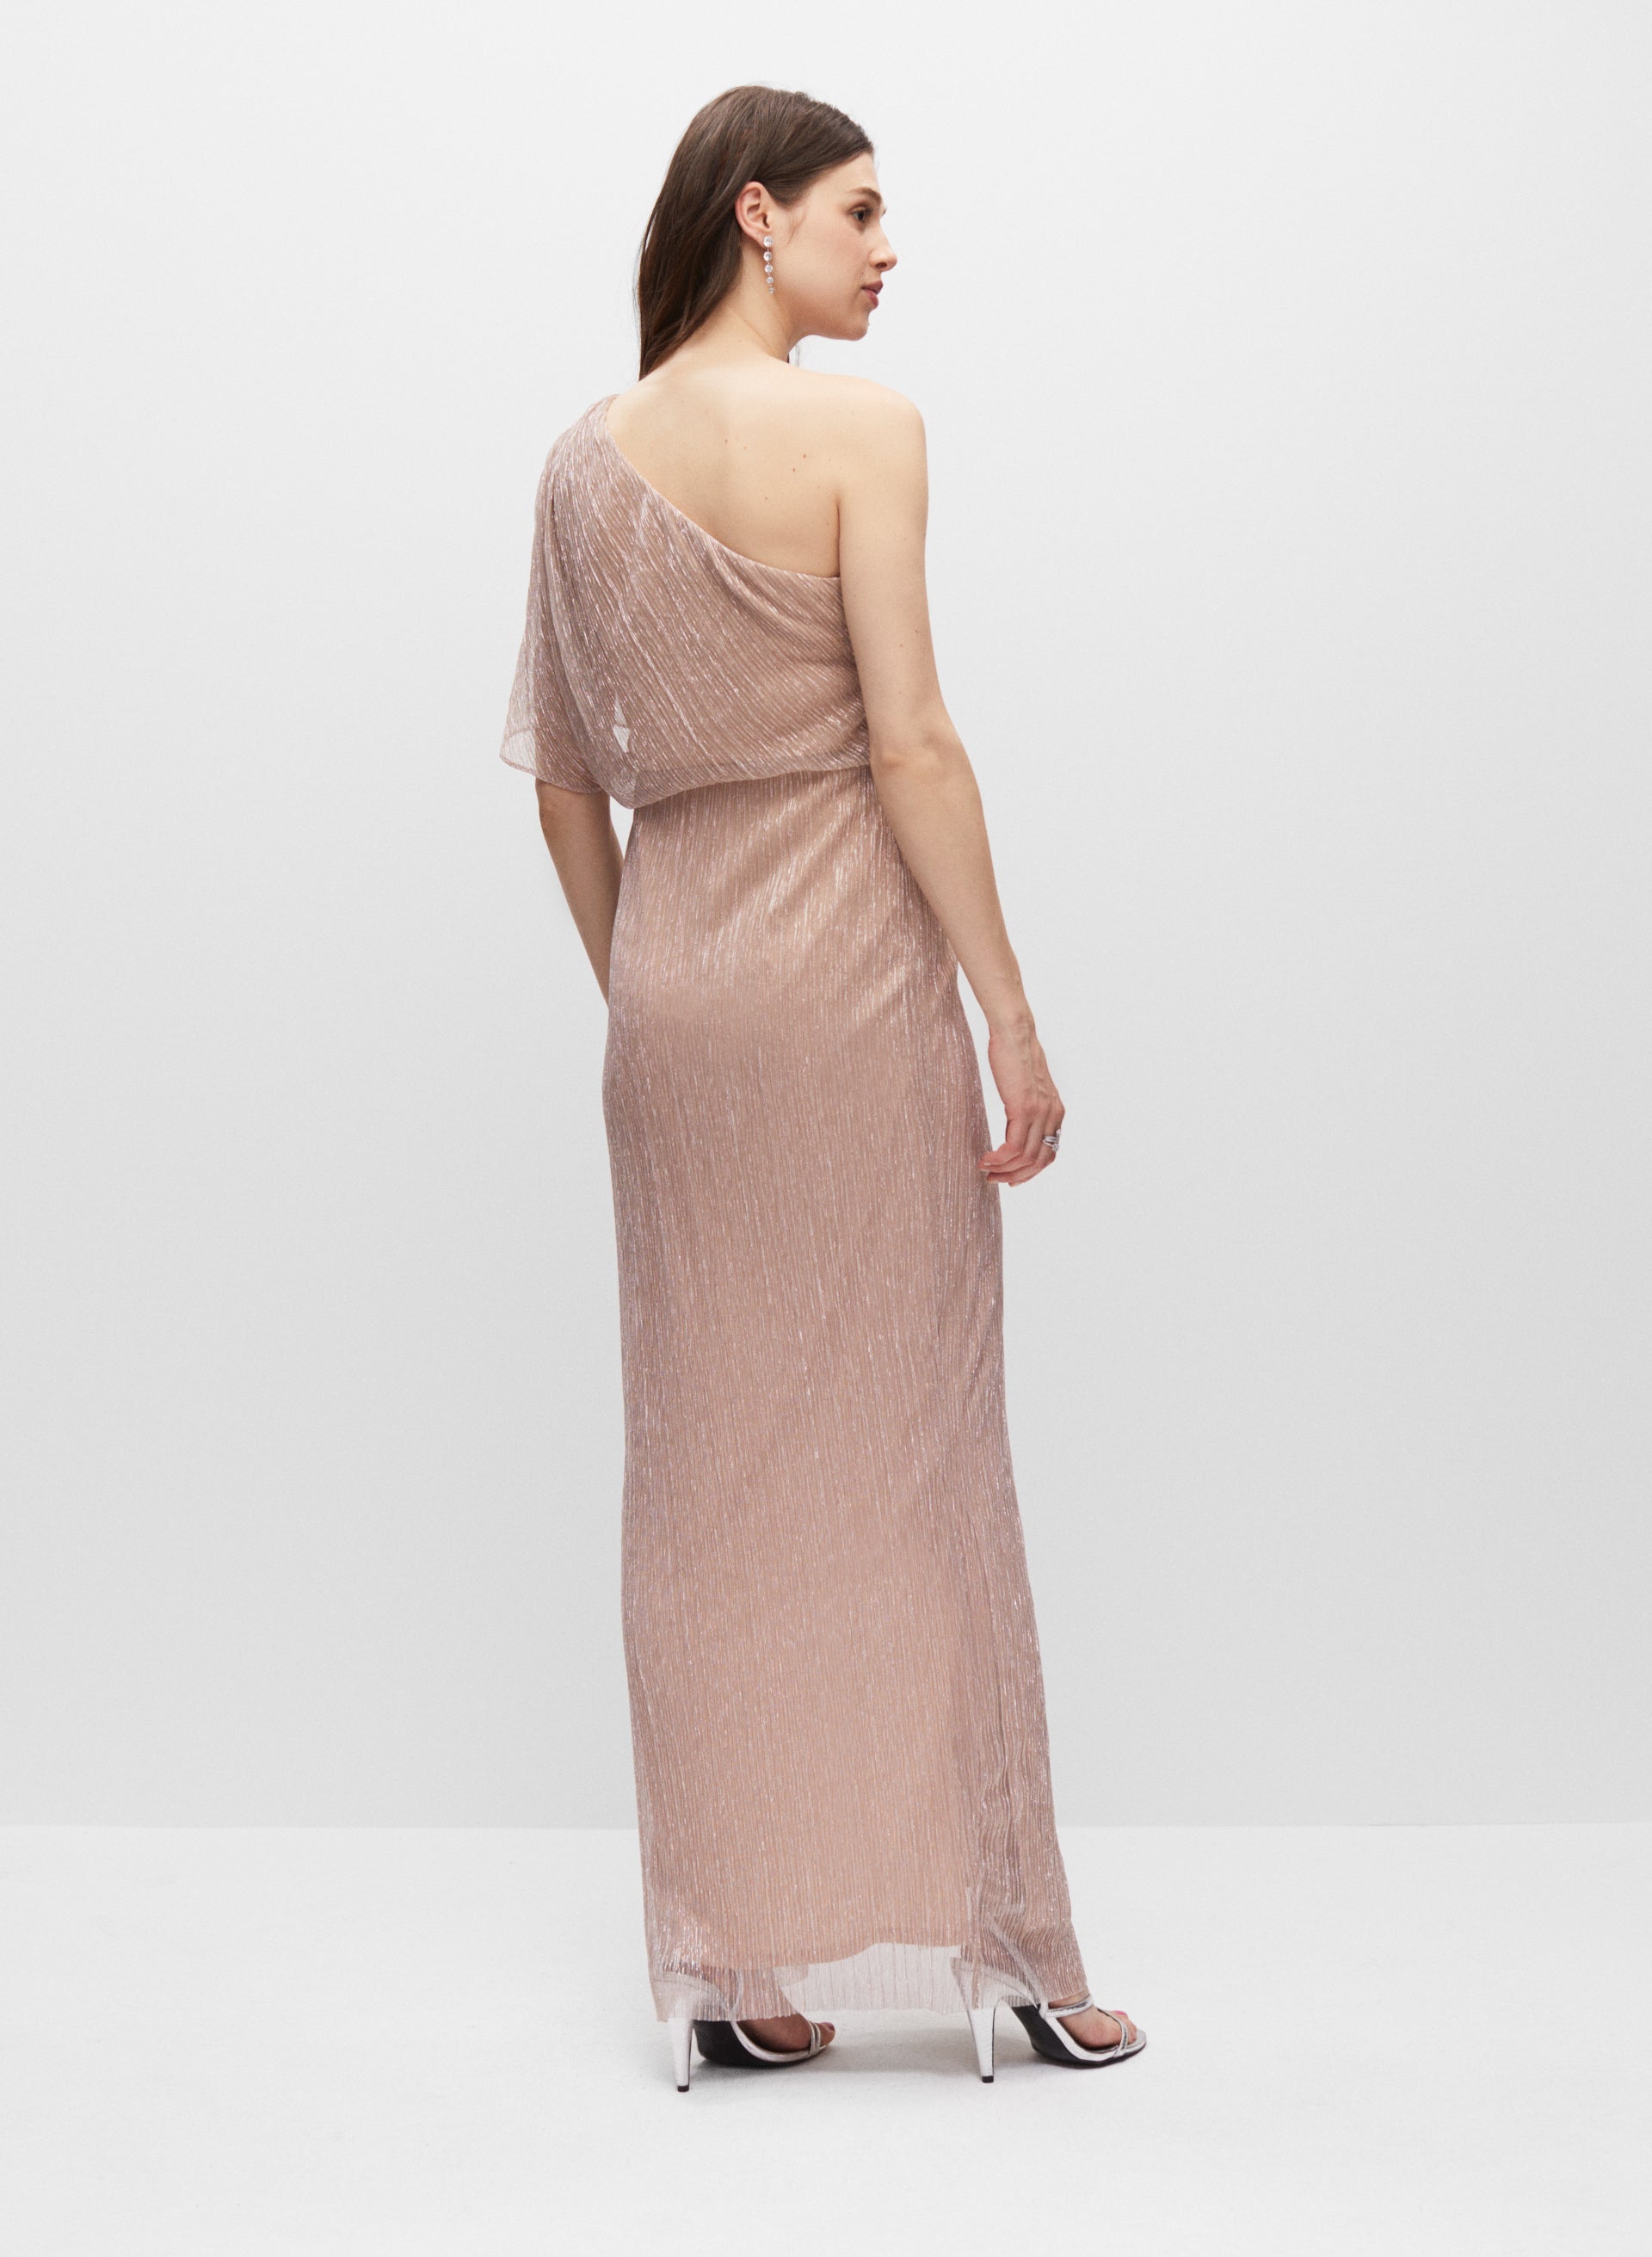 Adrianna Papell - One-Shoulder Gown